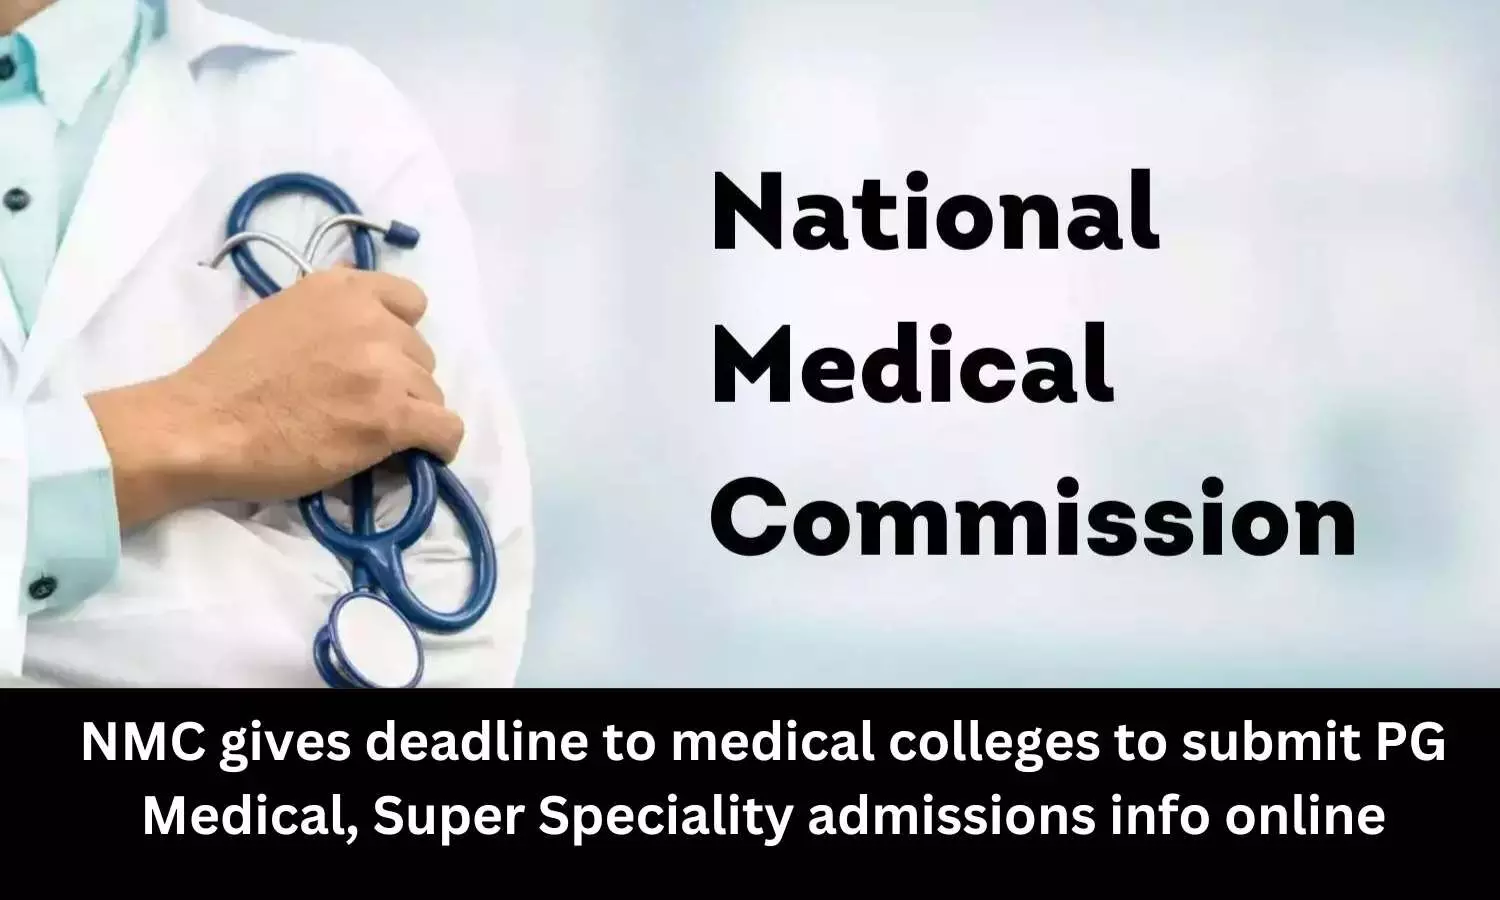 National Medical Commission gives deadline to medical colleges to submit Super Speciality, PG Medical admission info online